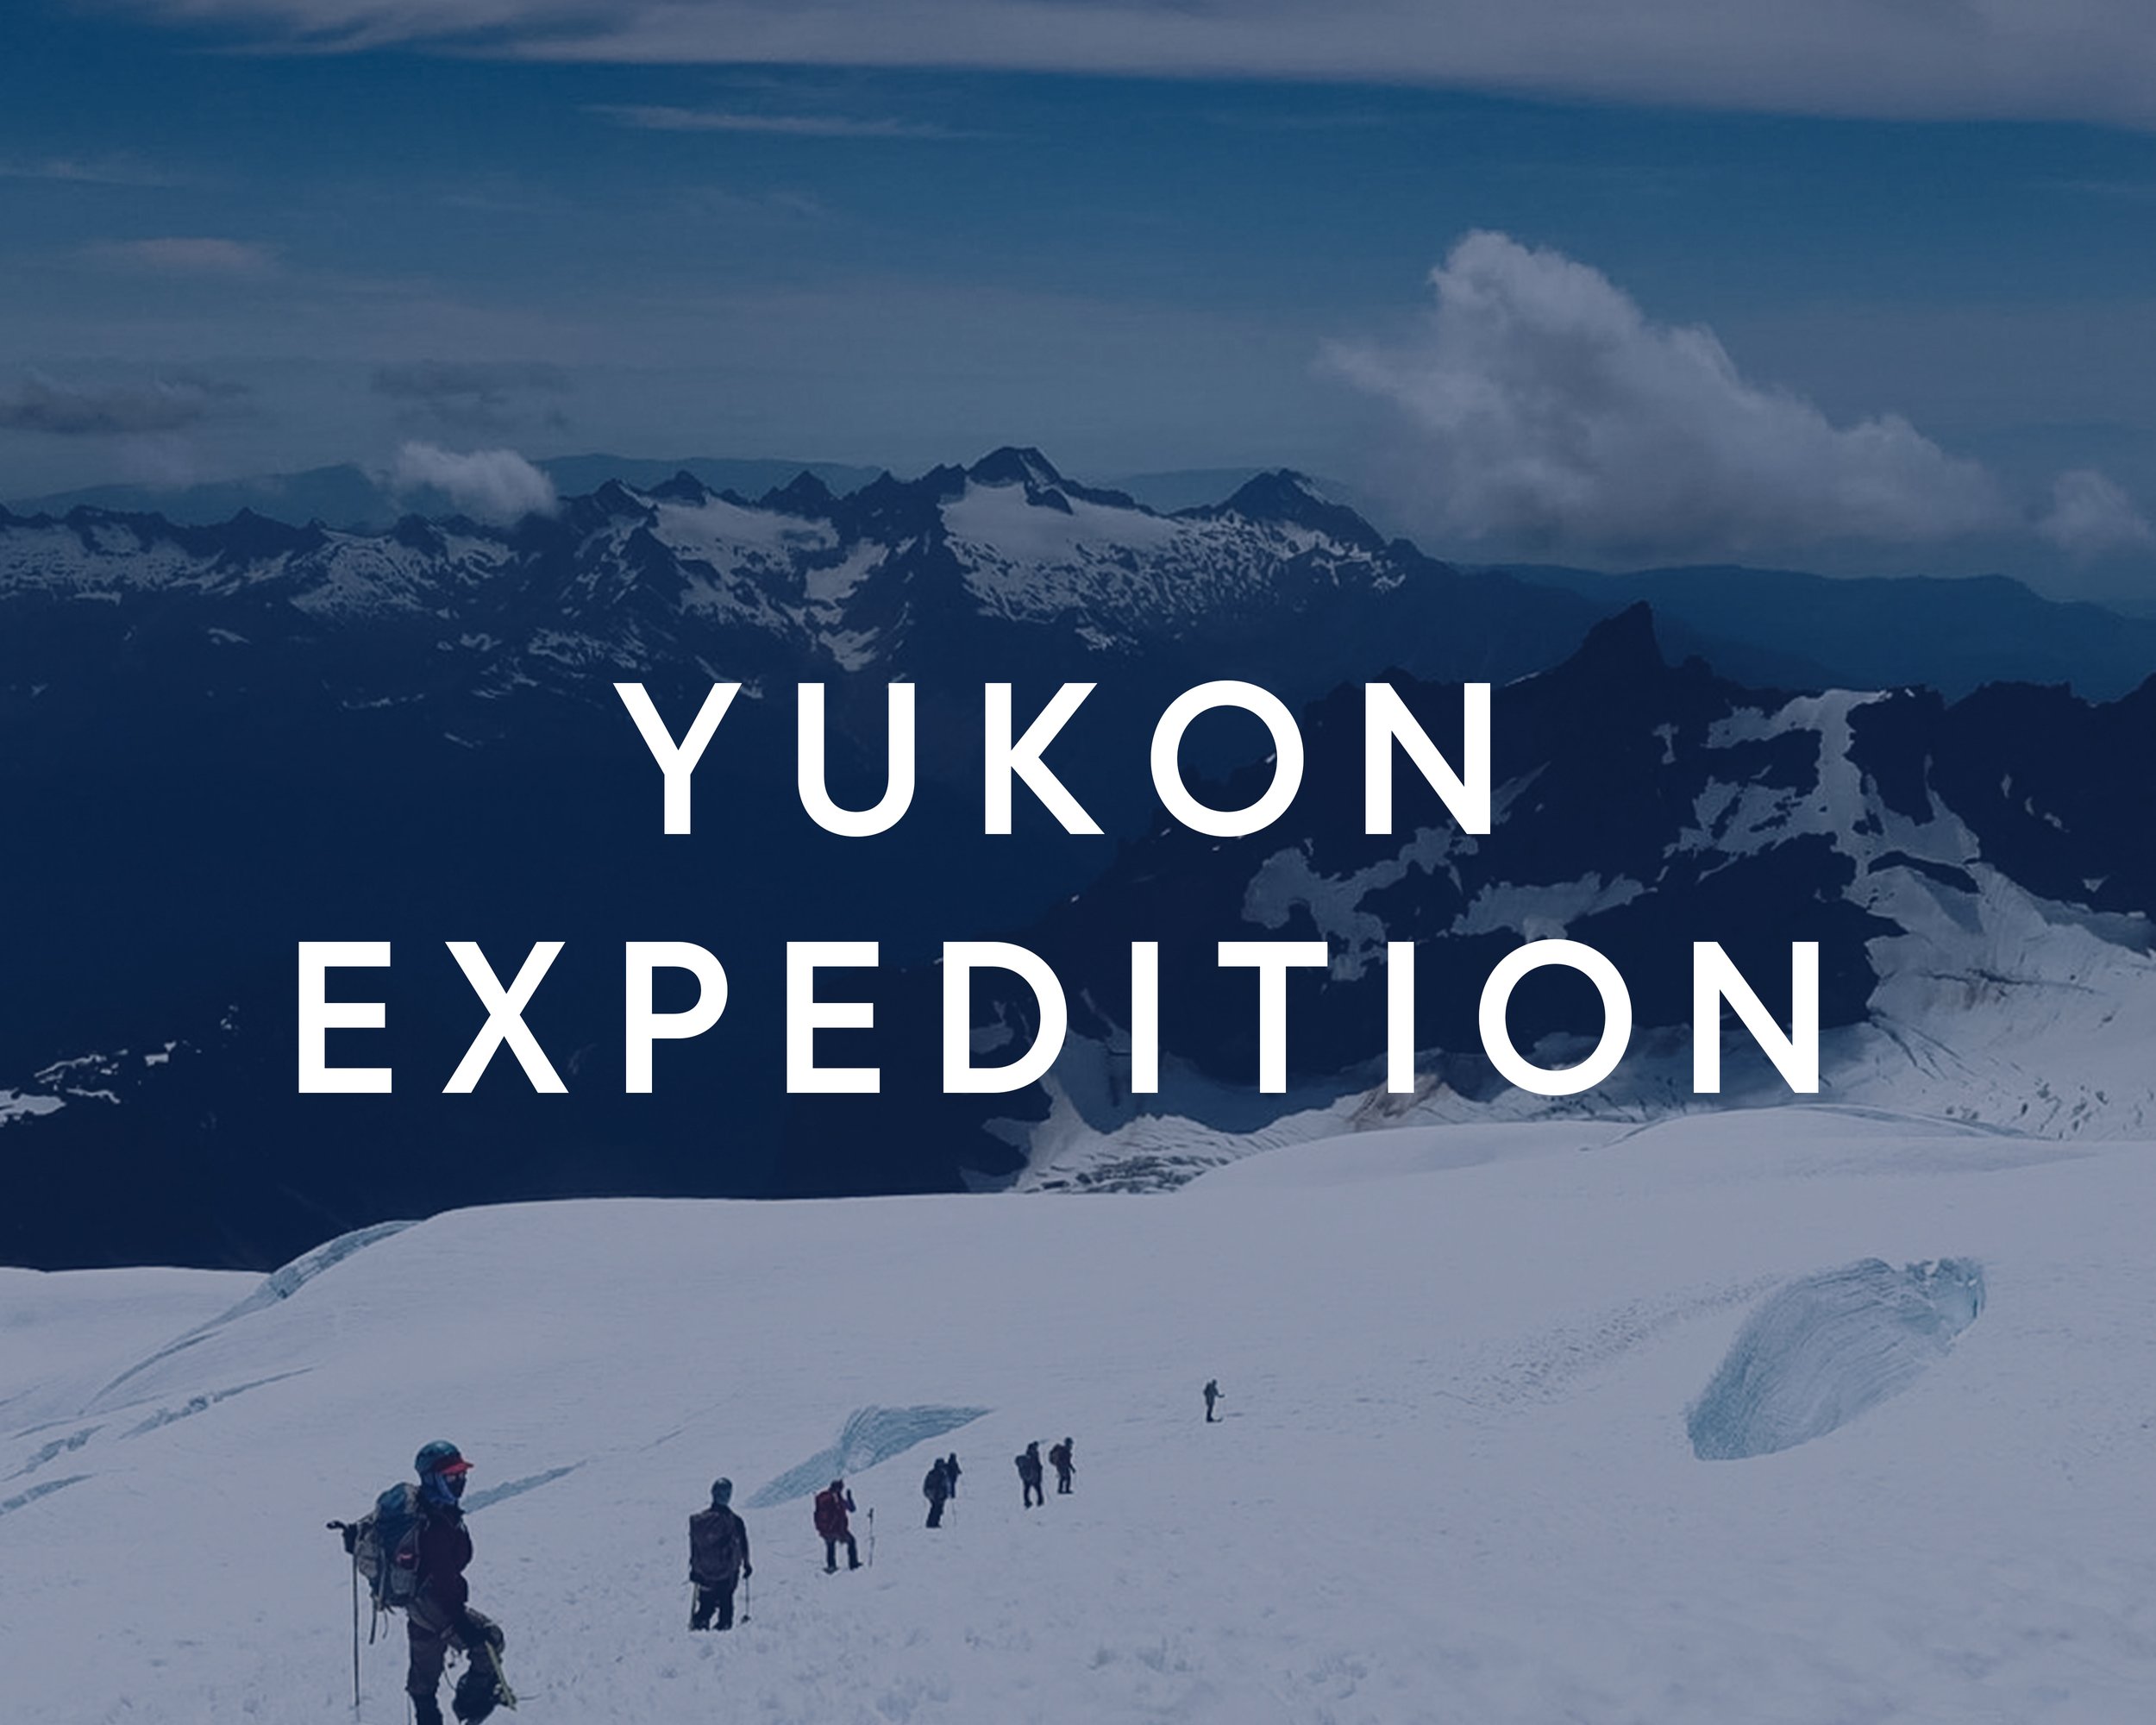 Image links to the yukon expedition information page (Copy)